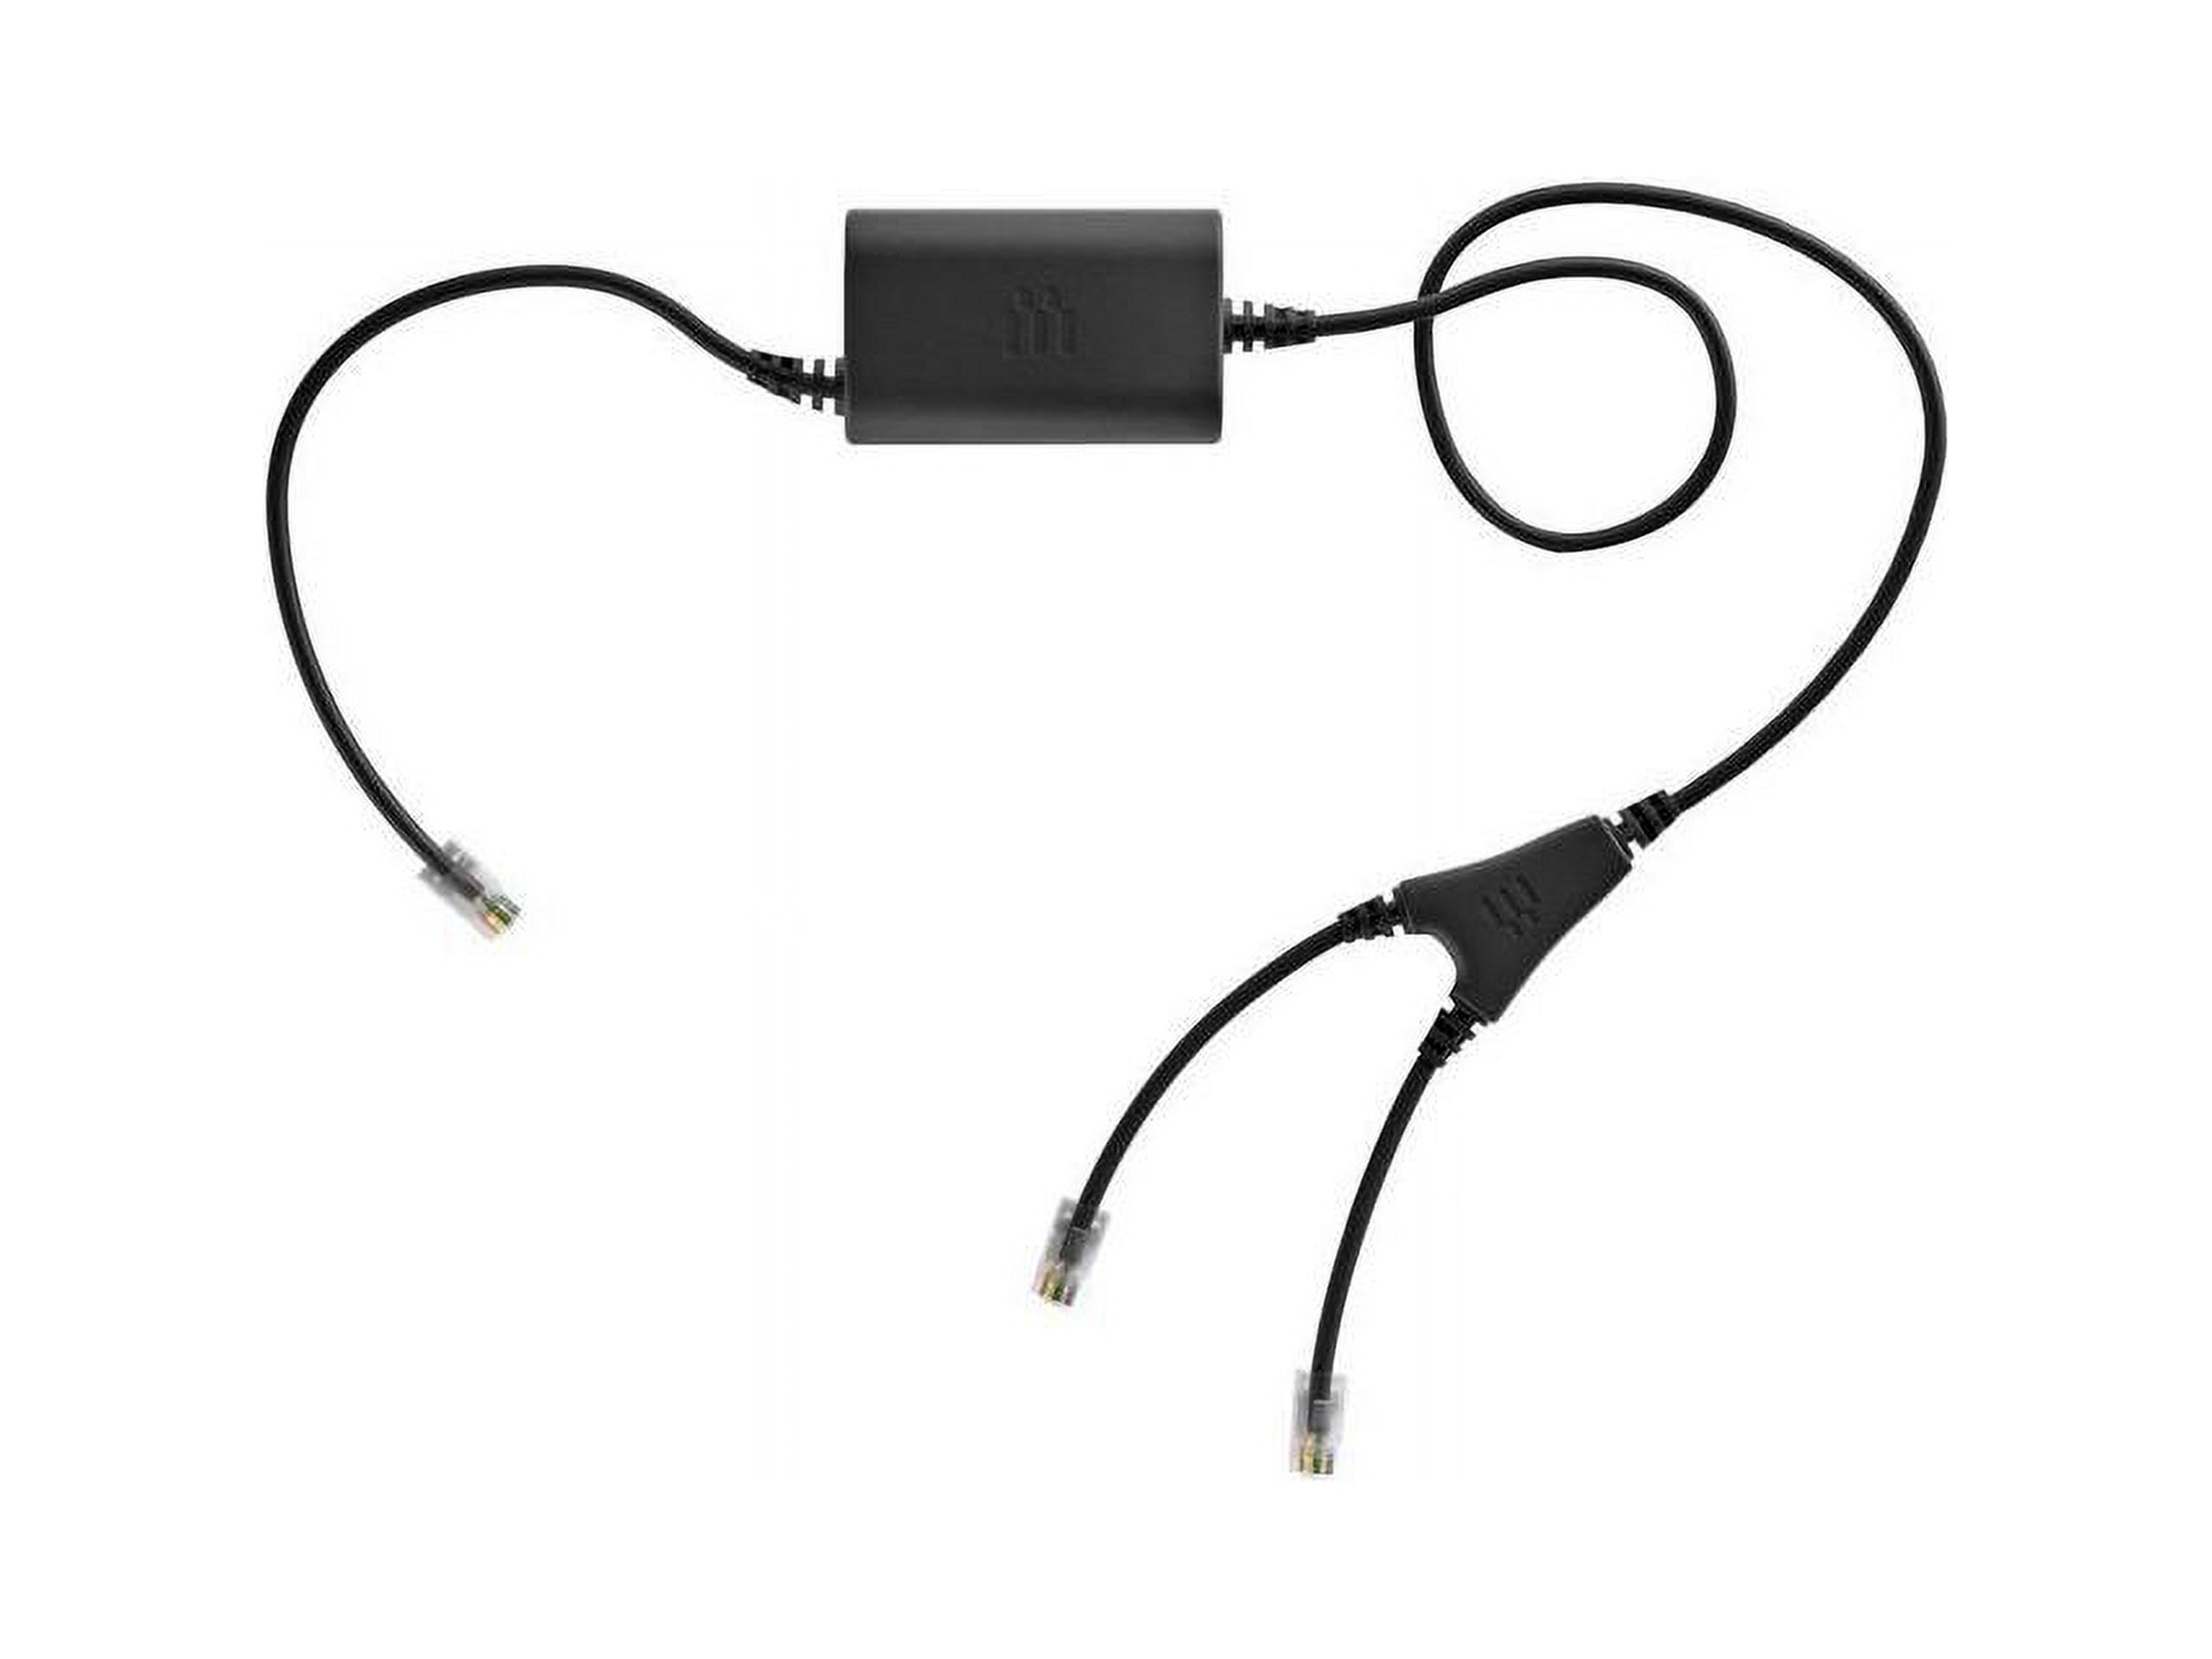 Sennheiser 1000740 9400 & 9500 Series Dect Avaya Adapter Cable for Electronic Hook Switch - image 3 of 3